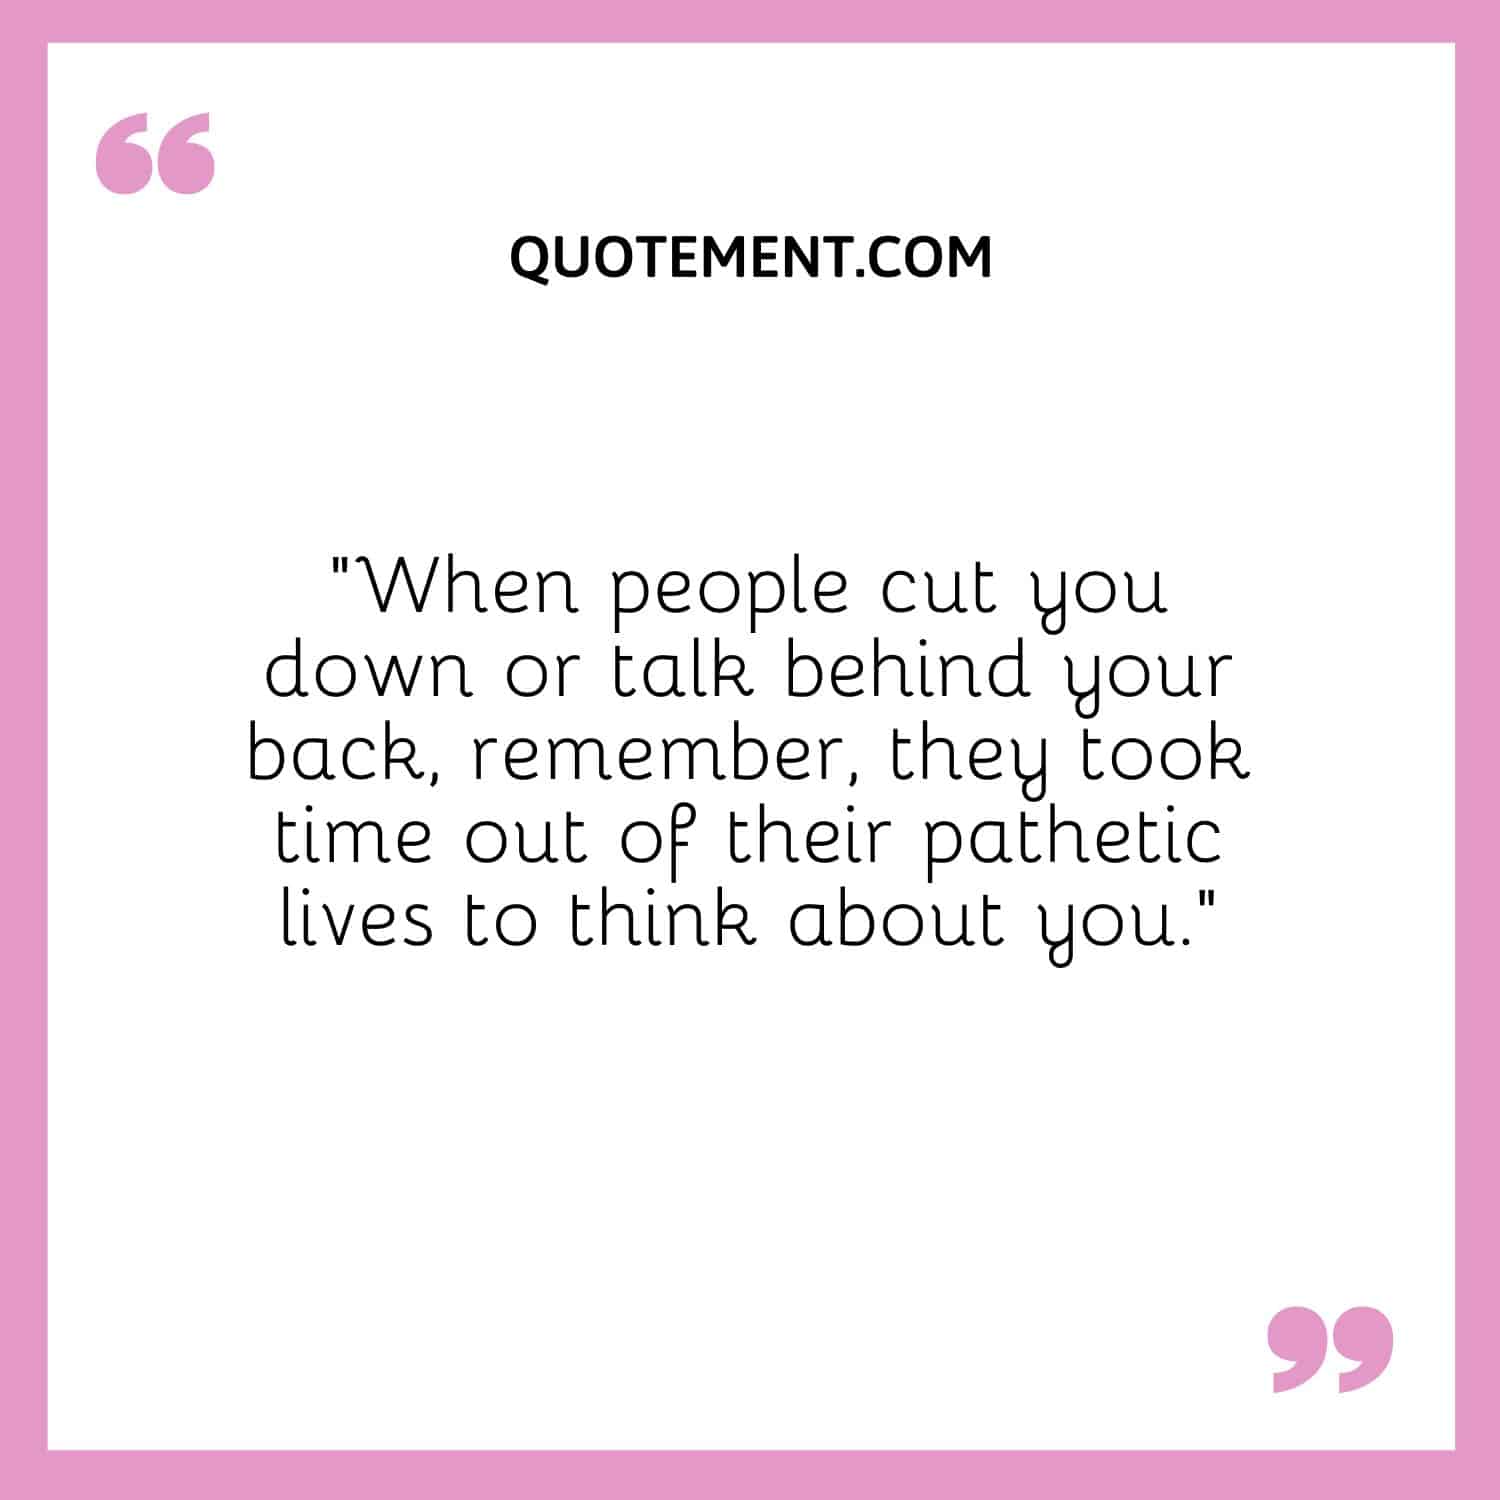 “When people cut you down or talk behind your back, remember, they took time out of their pathetic lives to think about you.”